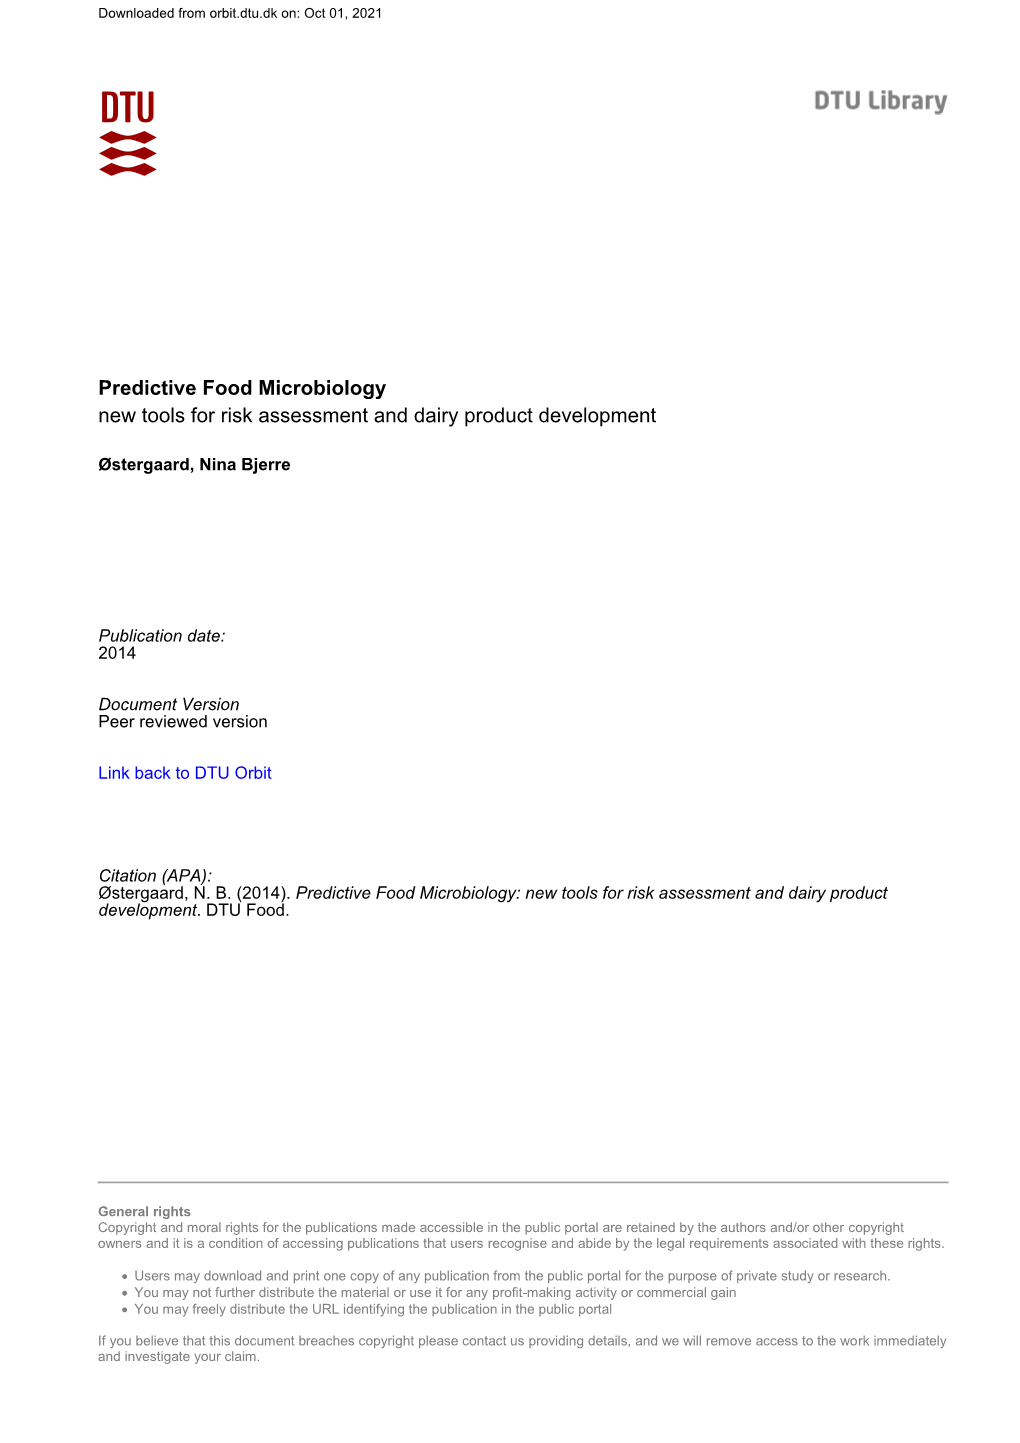 Predictive Food Microbiology New Tools for Risk Assessment and Dairy Product Development